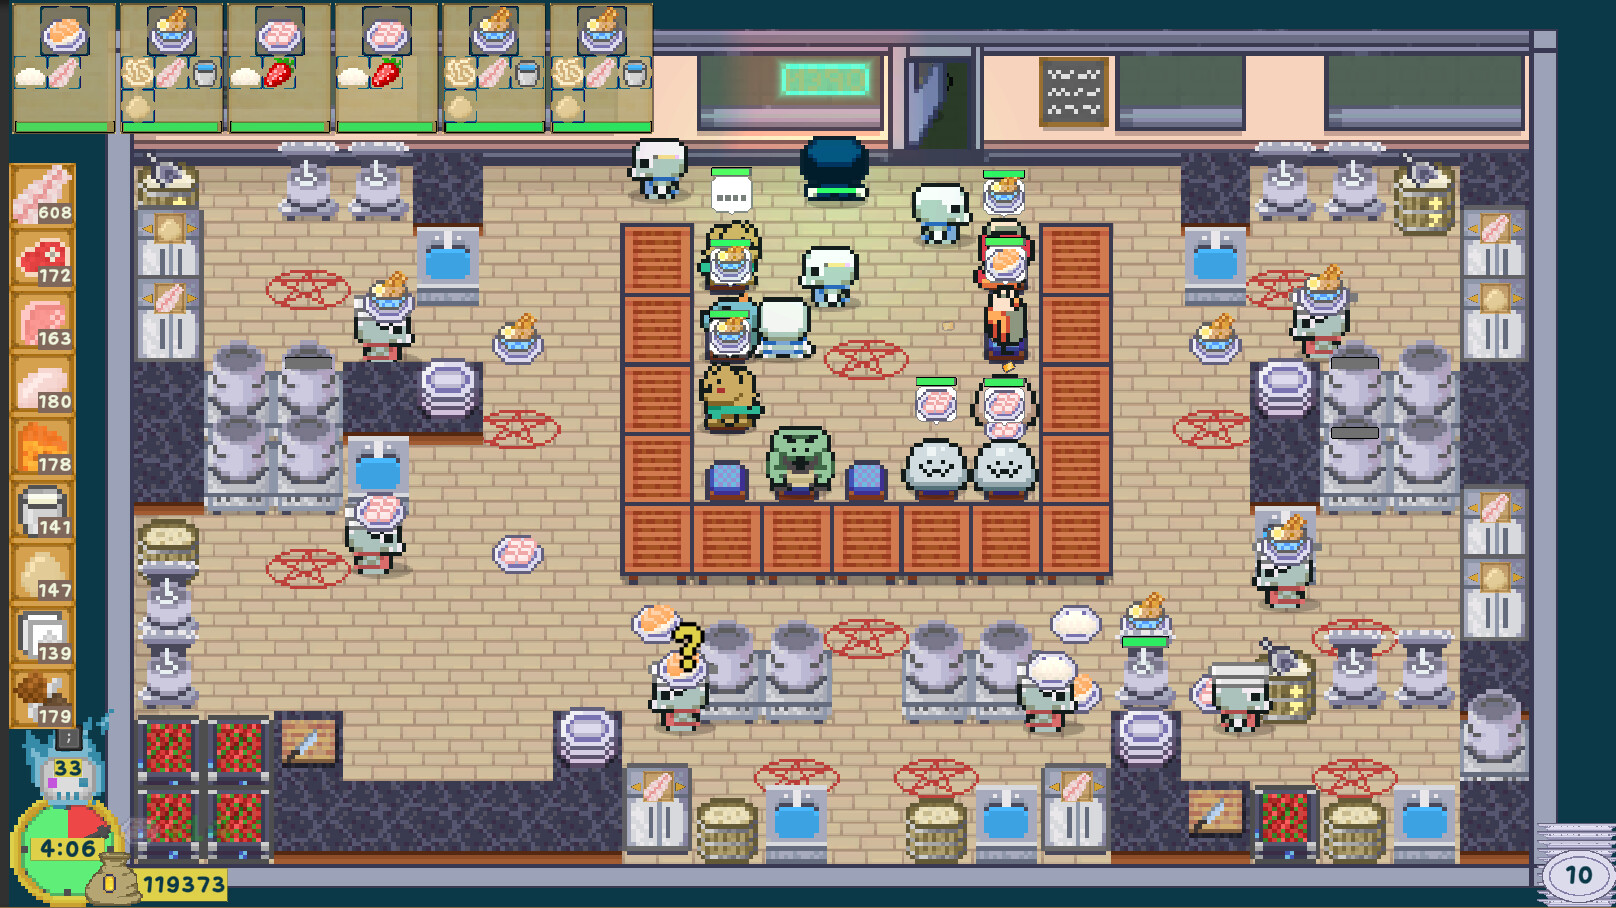 A restaurant run by skeletons and zombies in Bone's Cafe.